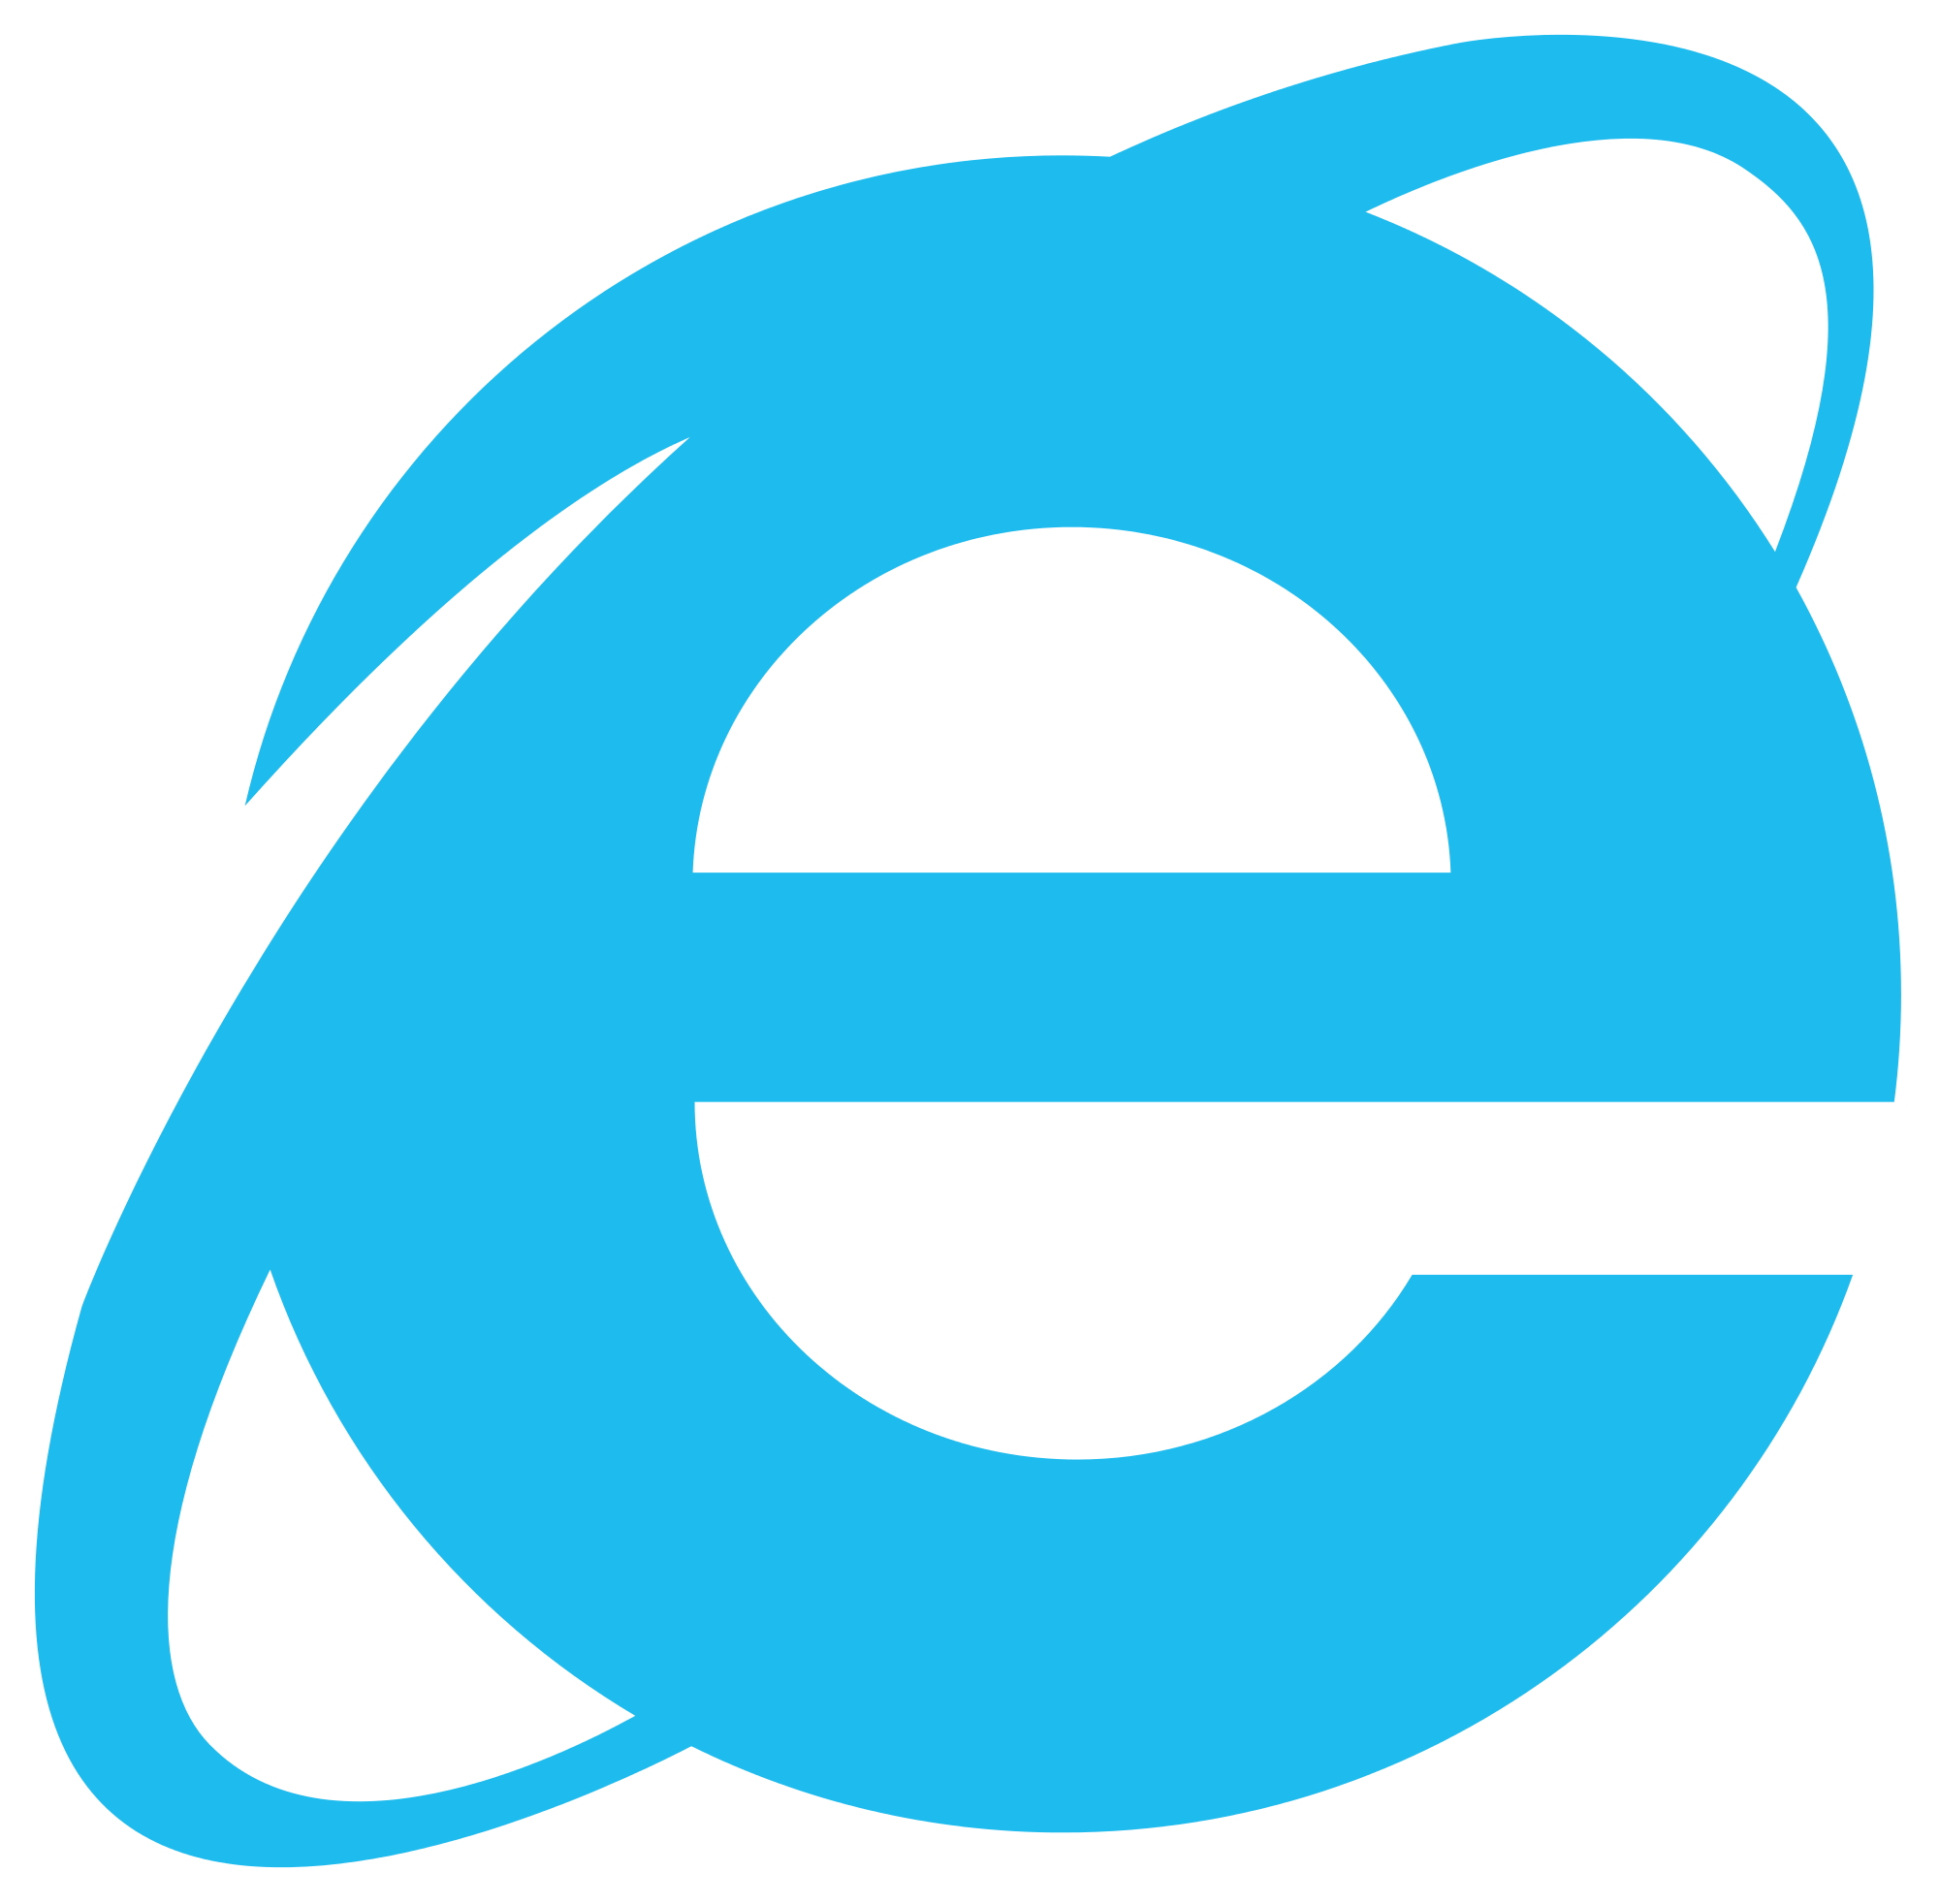 Windows Internet Explorer 10 Logo - Windows Update cause issues with printing for Internet Explorer